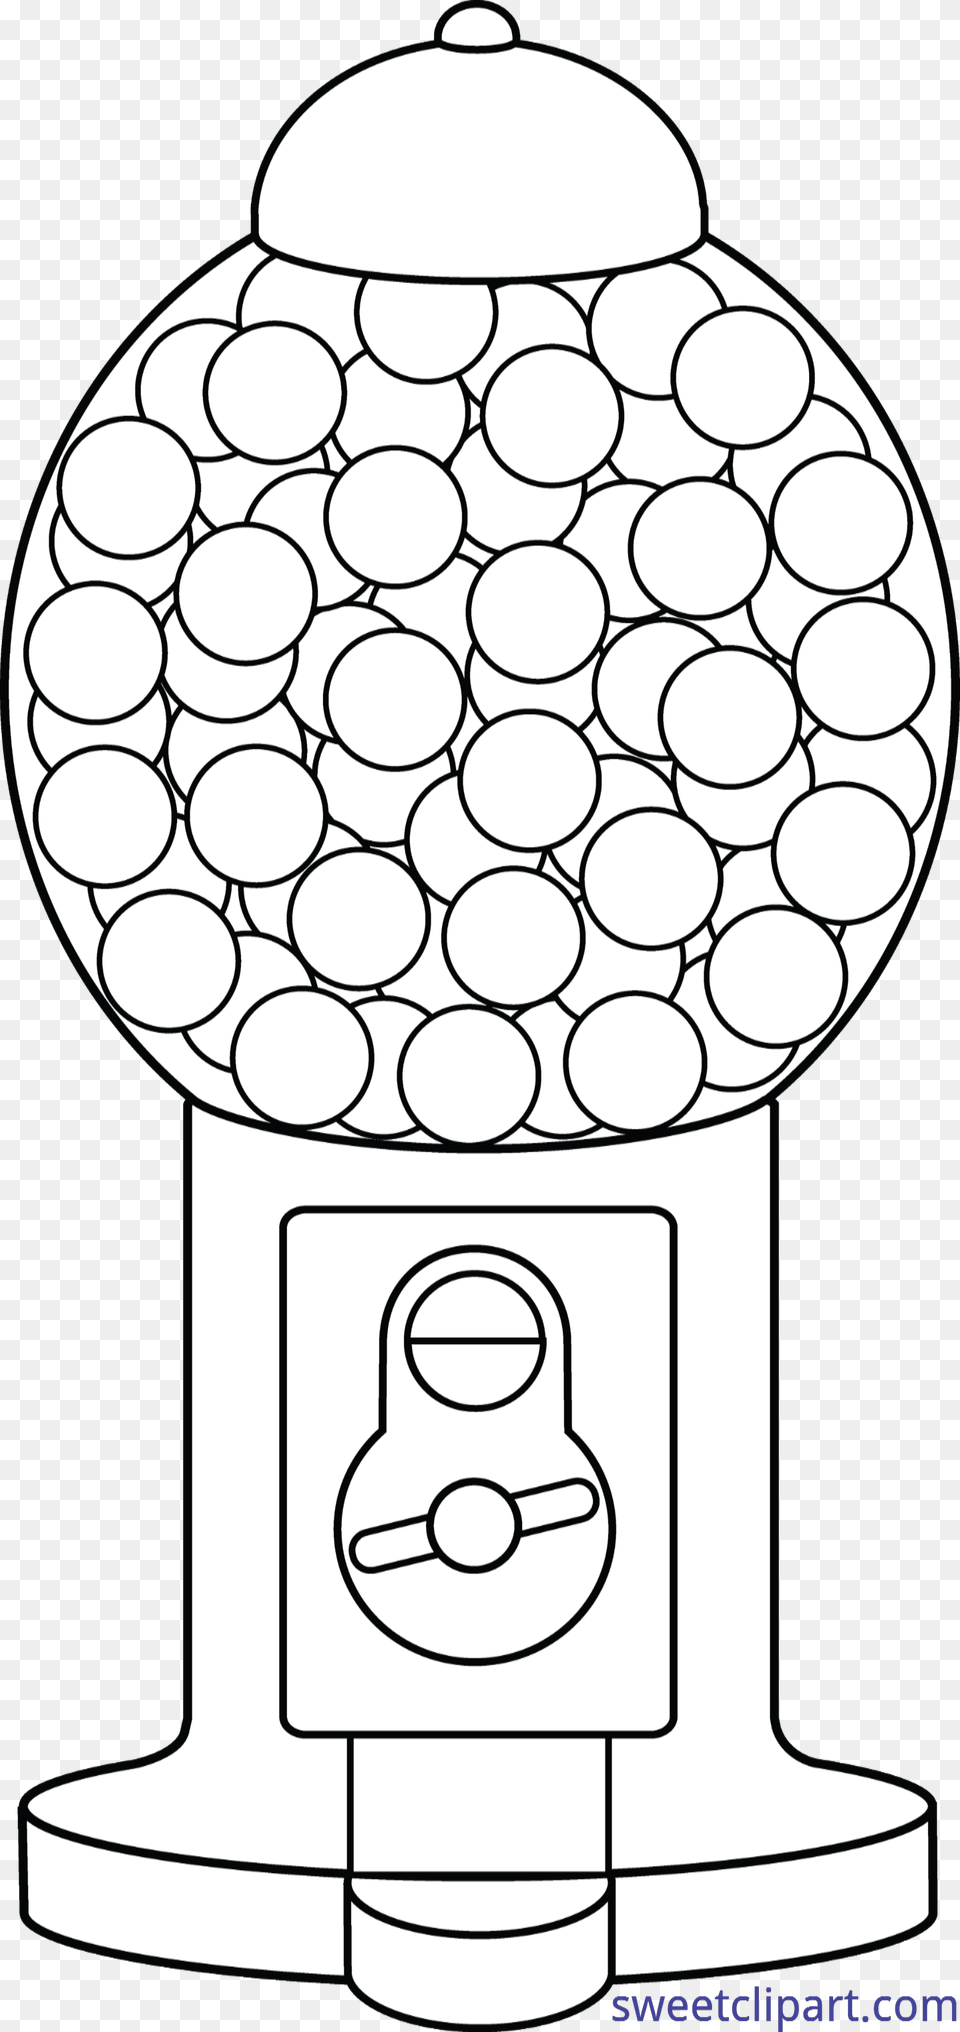 Gumball Machine Coloring Page, Lamp, Sphere, Jar, Face Free Png